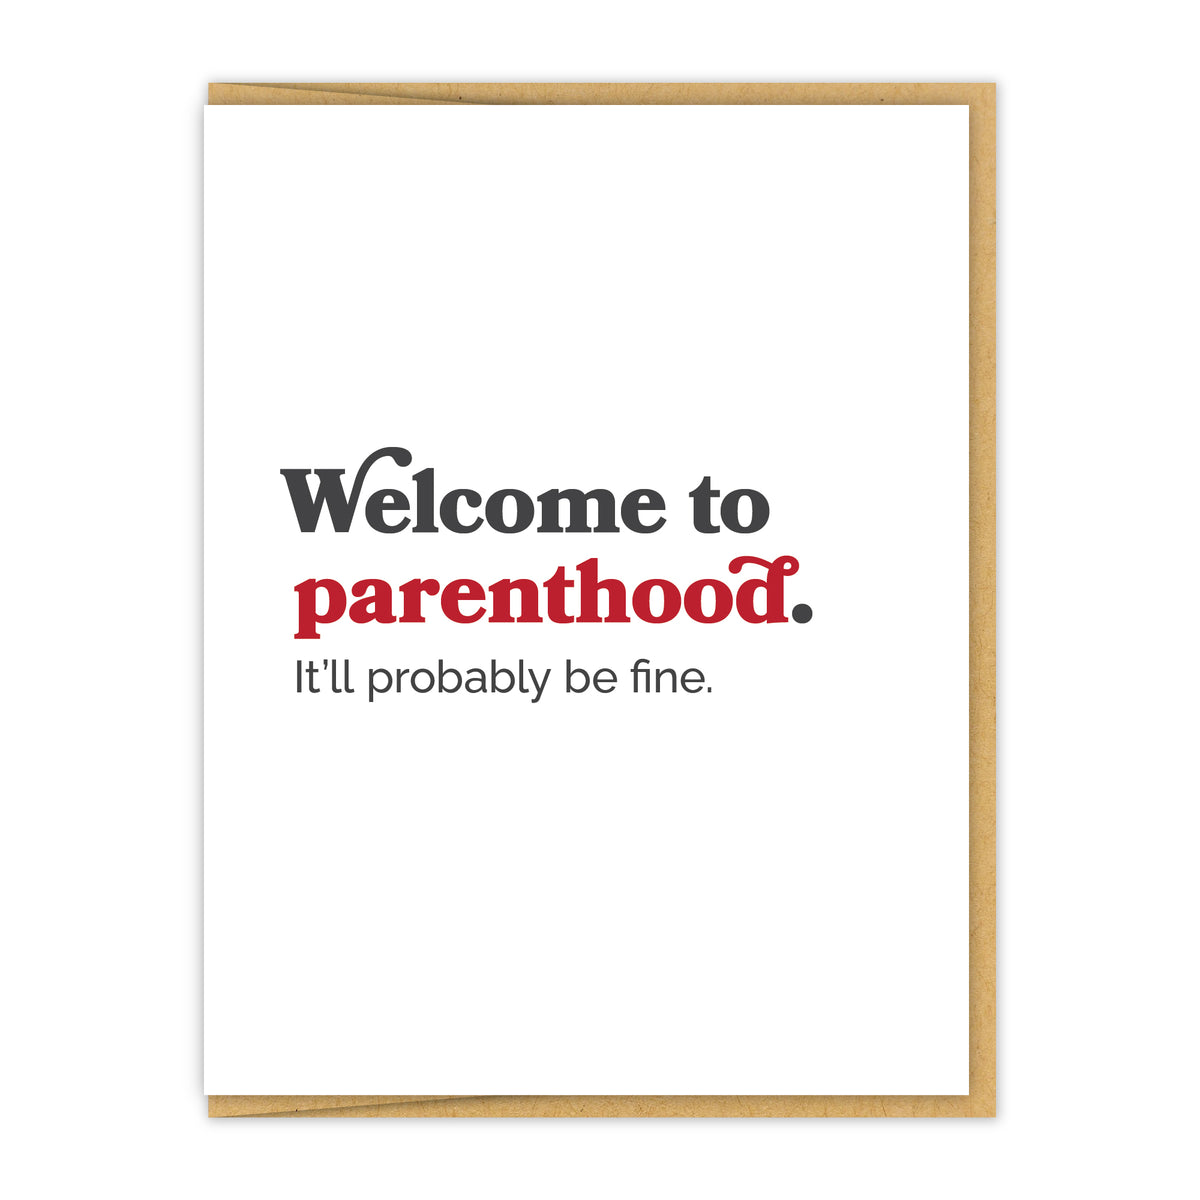 Welcome to parenthood